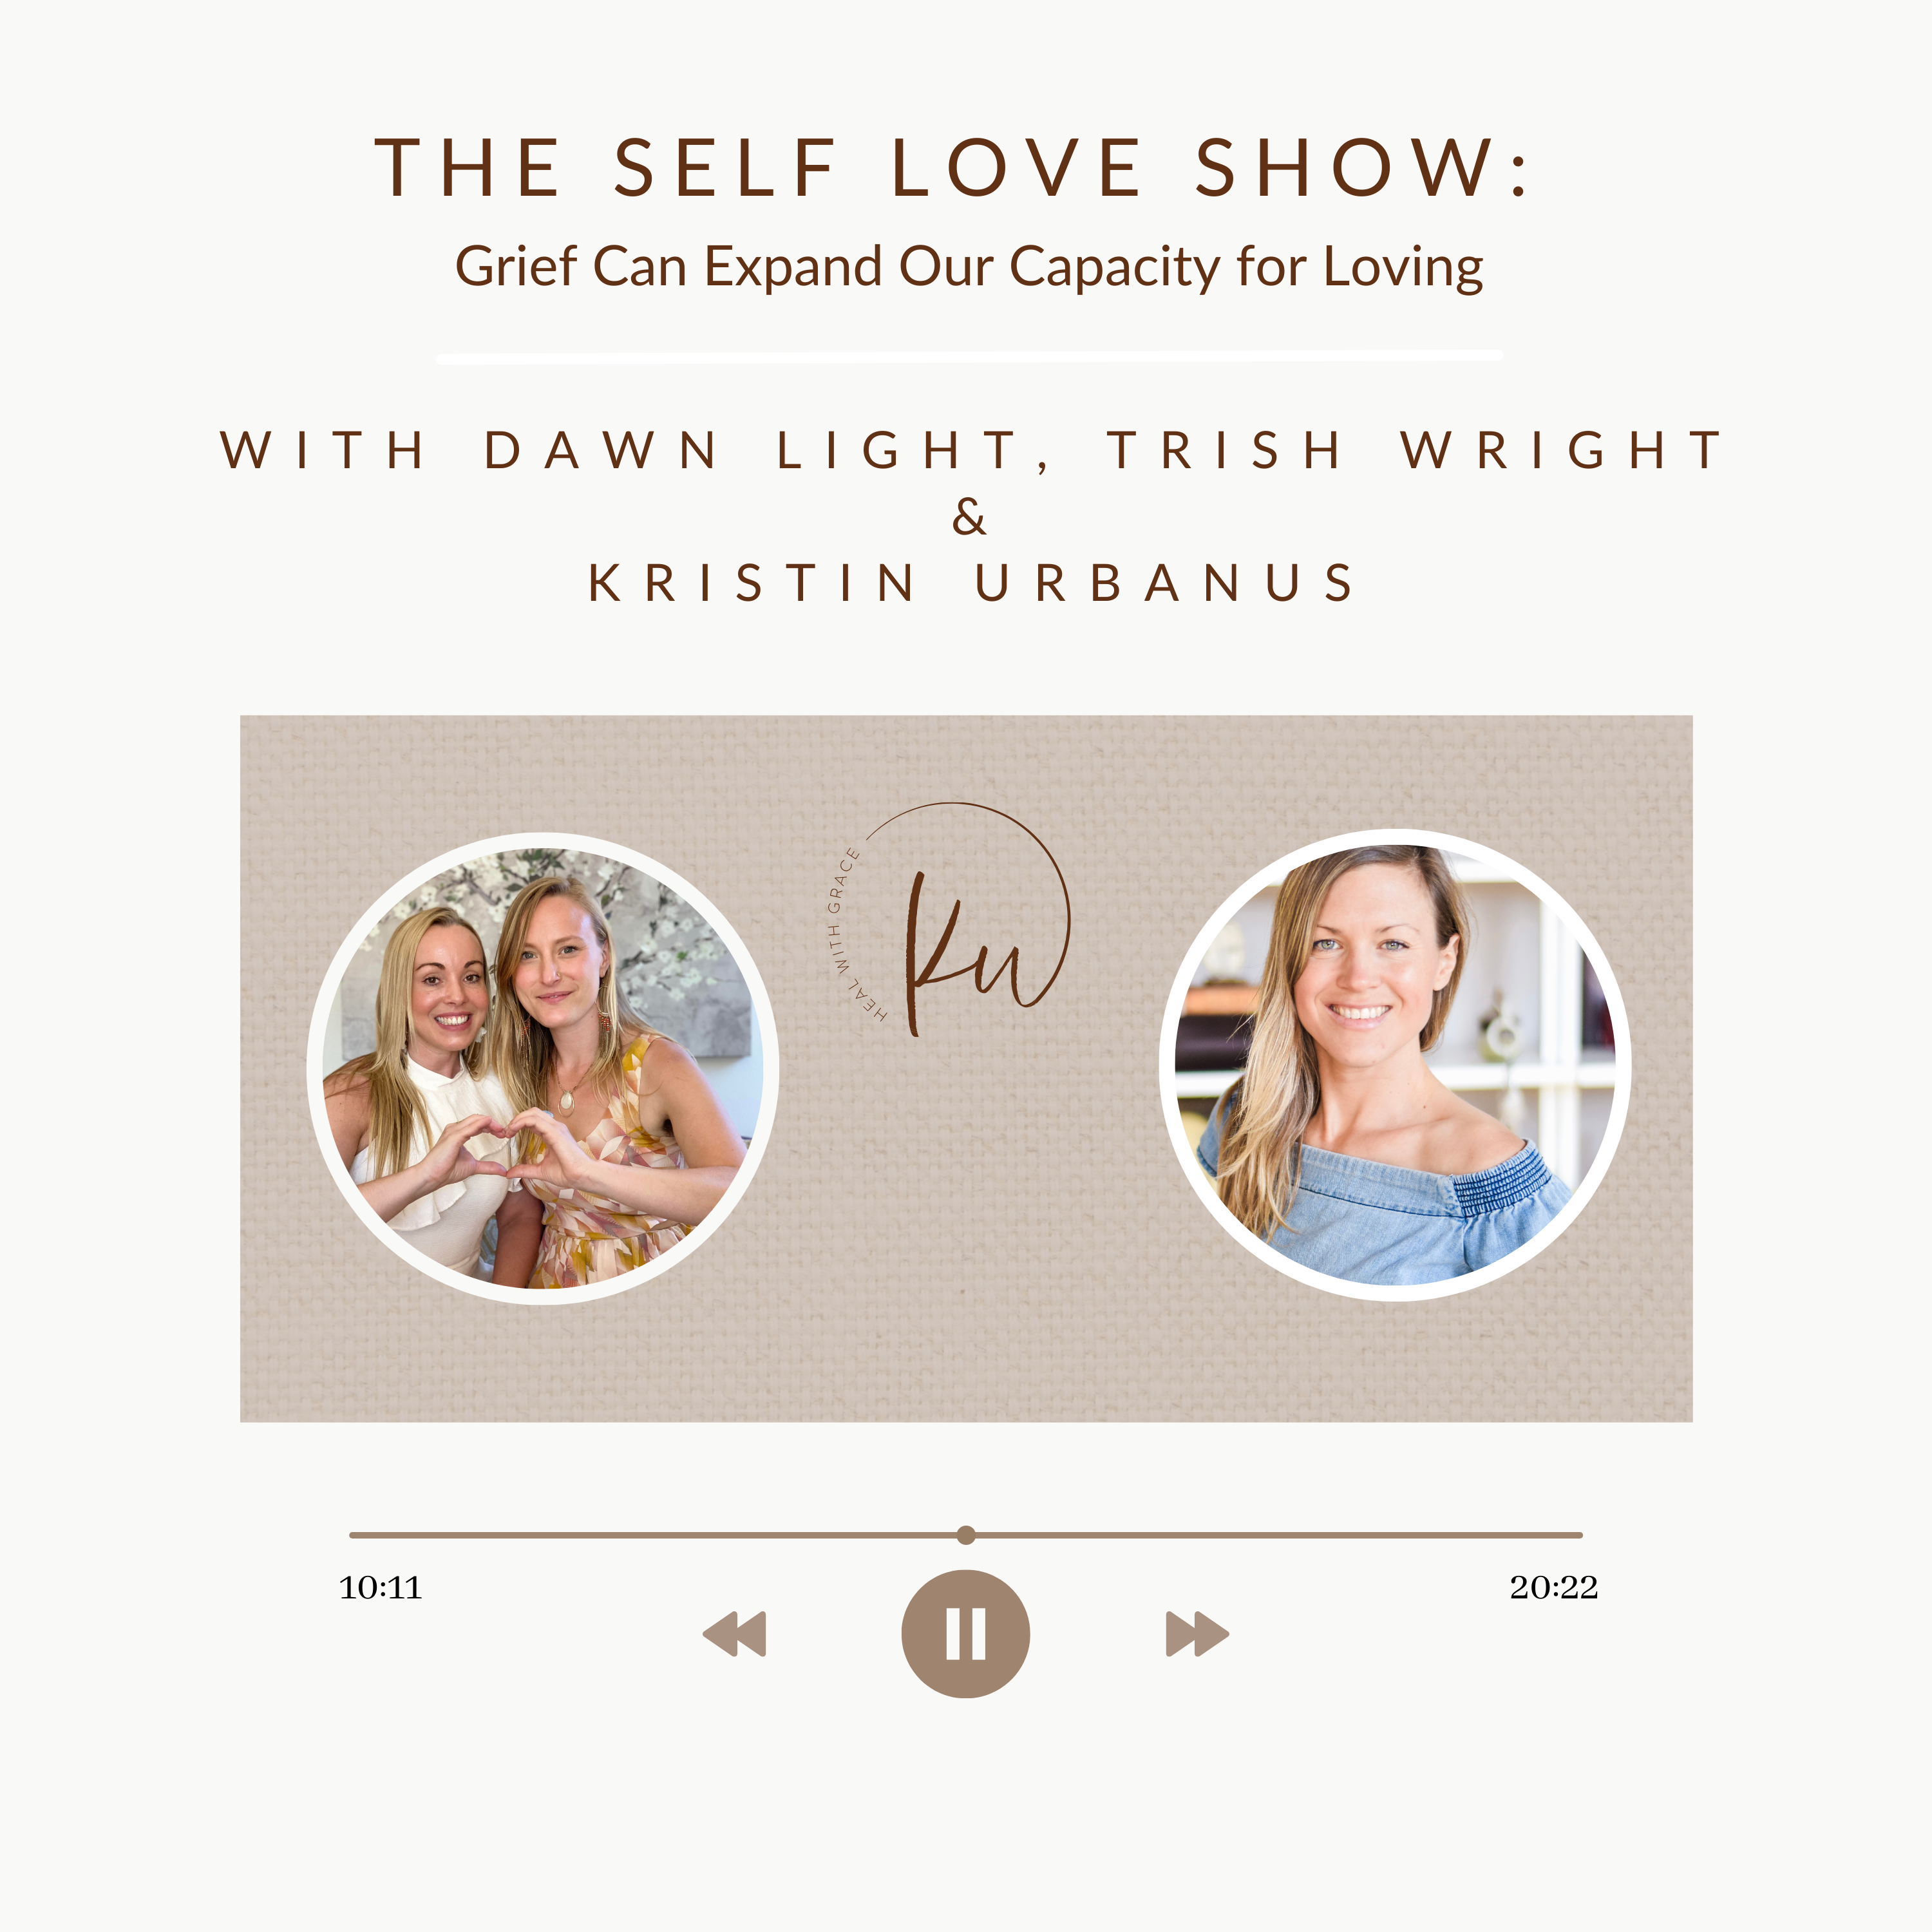 The Self Love Show: Grief can expand our Capacity for Loving